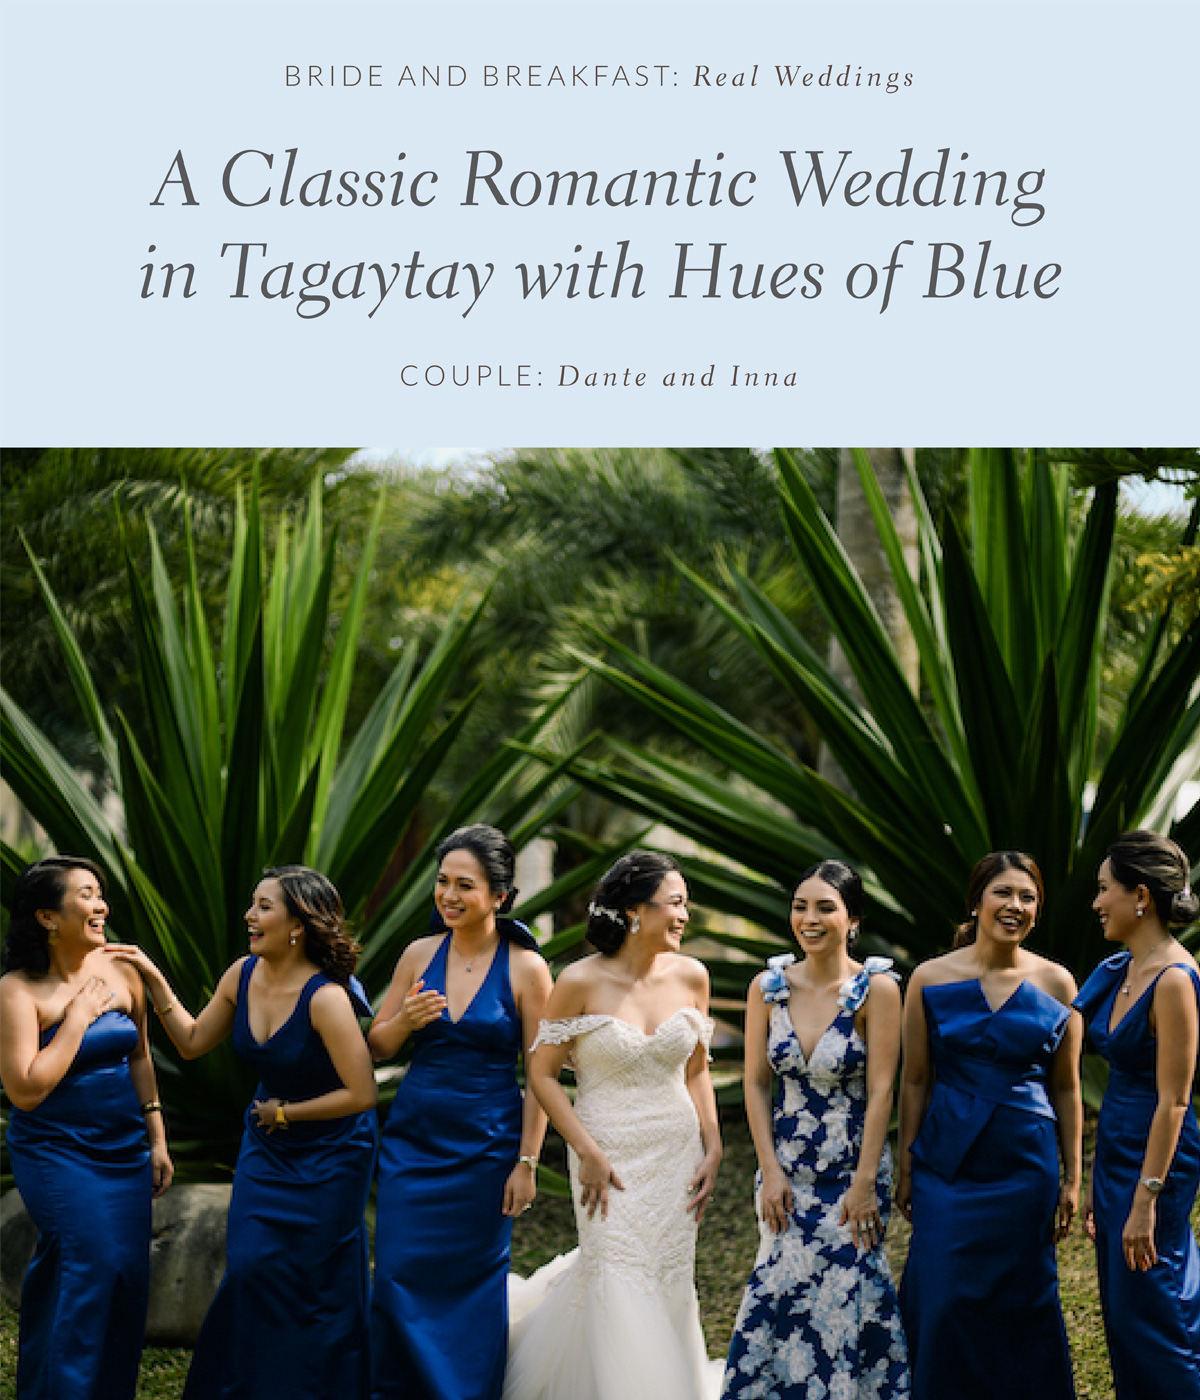 A Classic Romantic Wedding in Tagaytay with Hues of Blue